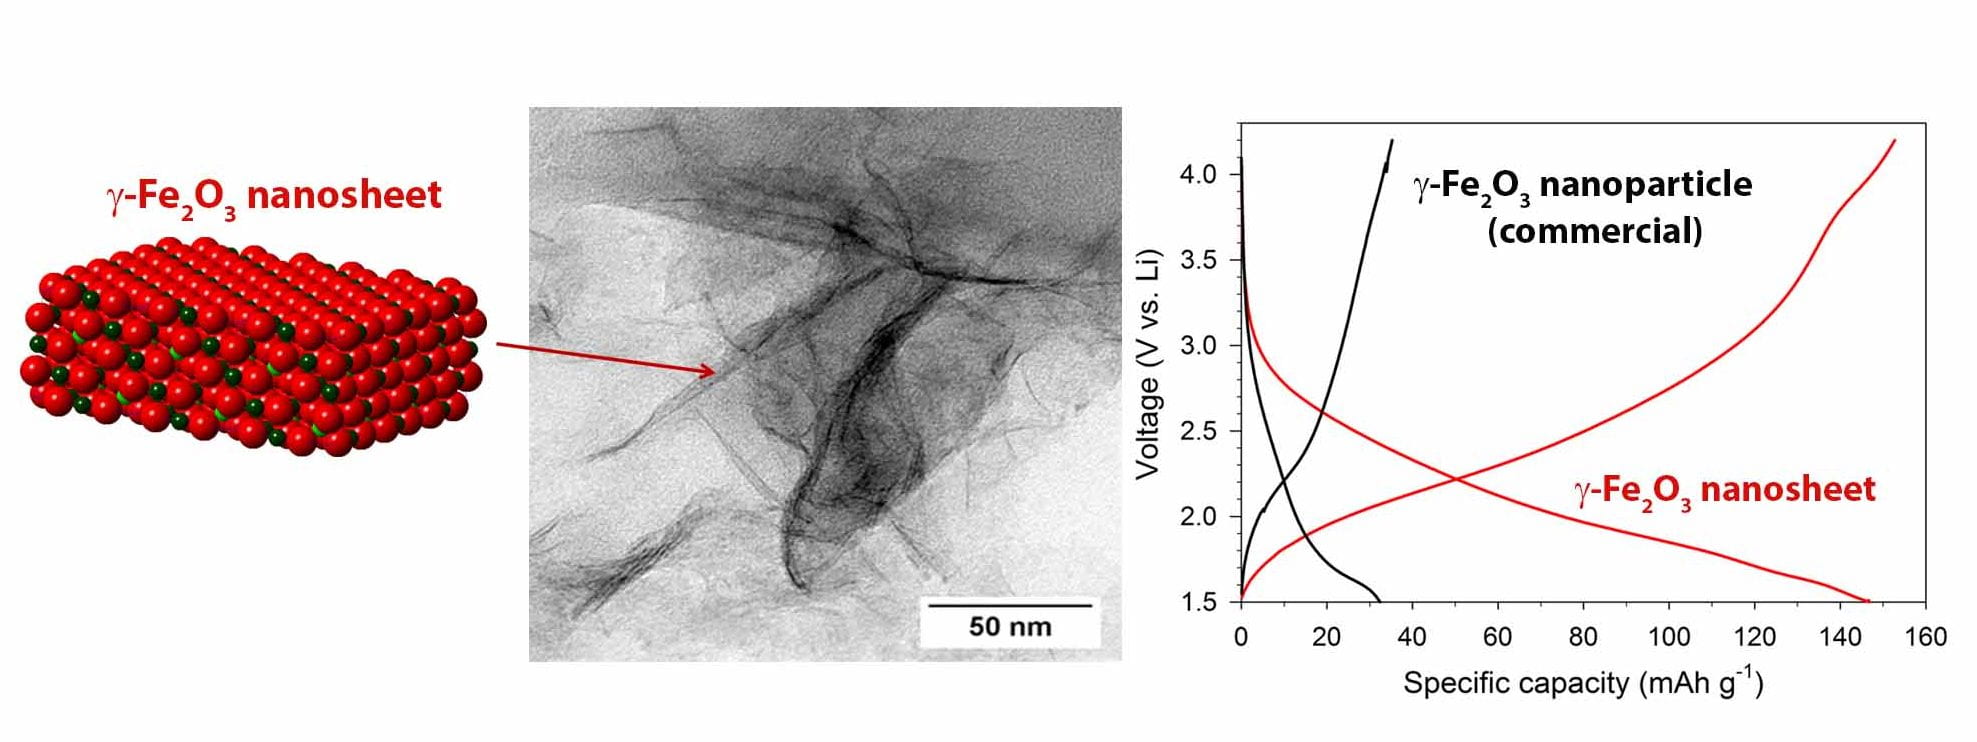 Representation of structure of iron oxide (g-Fe2O3) nanosheets; transmission electron microscopy (TEM) image of iron oxide nanosheets, and galvanostatic charge and discharge profiles that show iron oxide nanosheets have significantly higher capacities than nanoparticles.